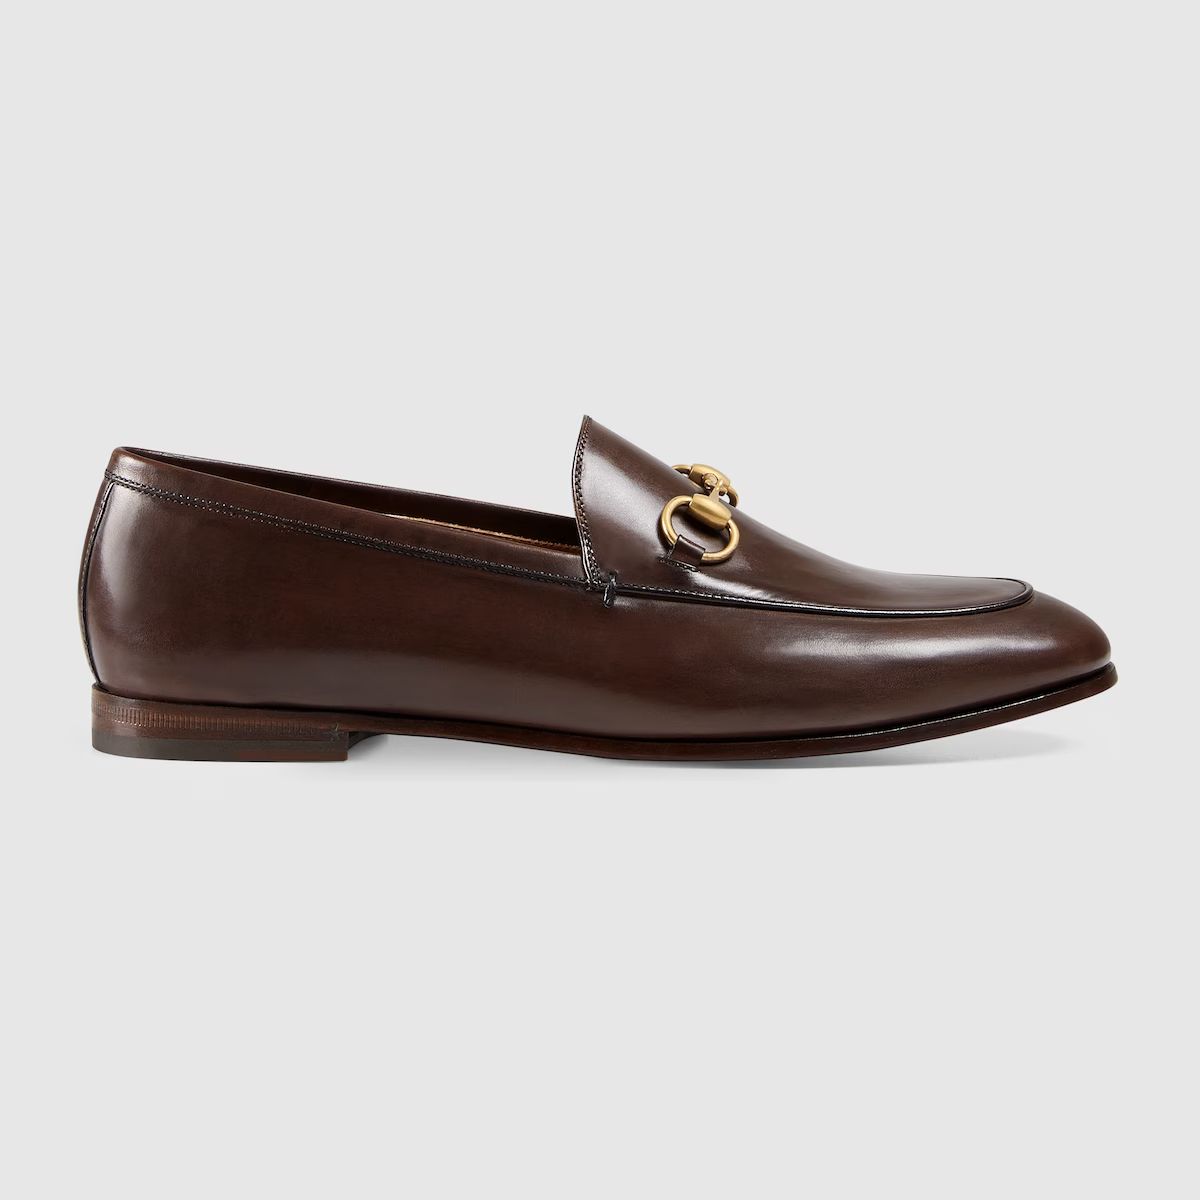 Women's Gucci Jordaan leather loafer | Gucci (US)